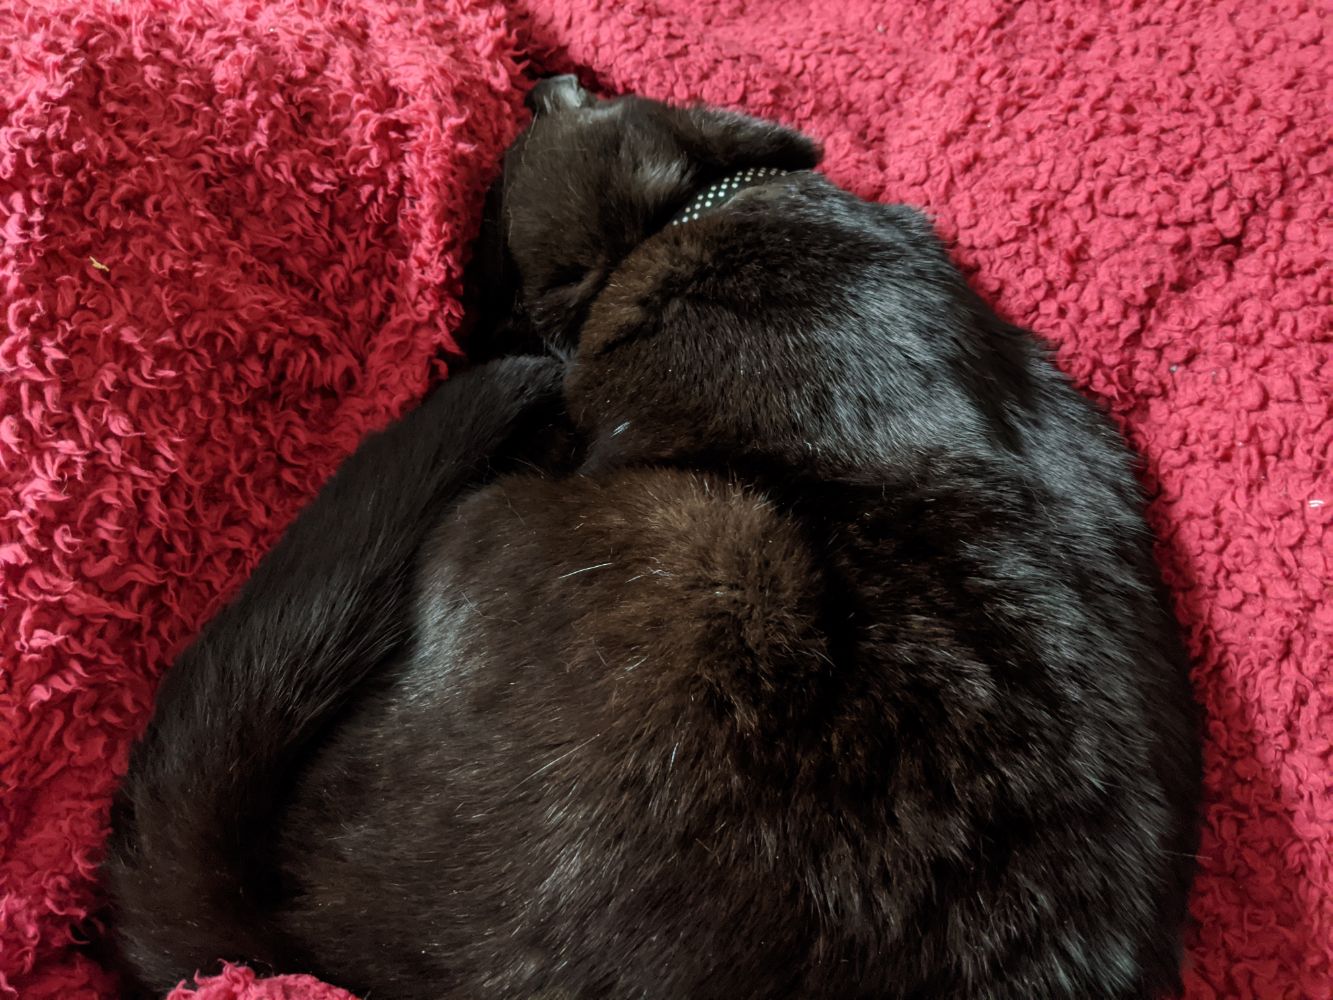 Black cat lying in Jamie's lap, with his head tucked into the red blanket